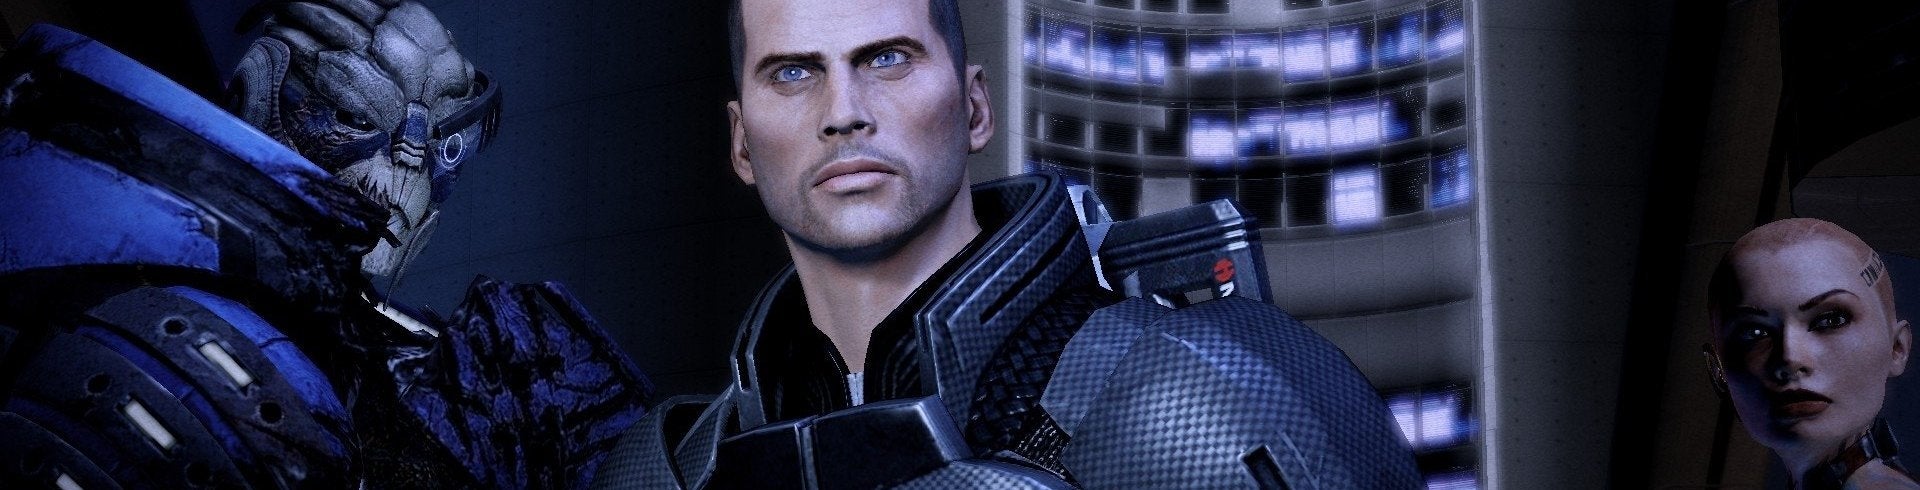 Image for Mass Effect 2 and the importance of character